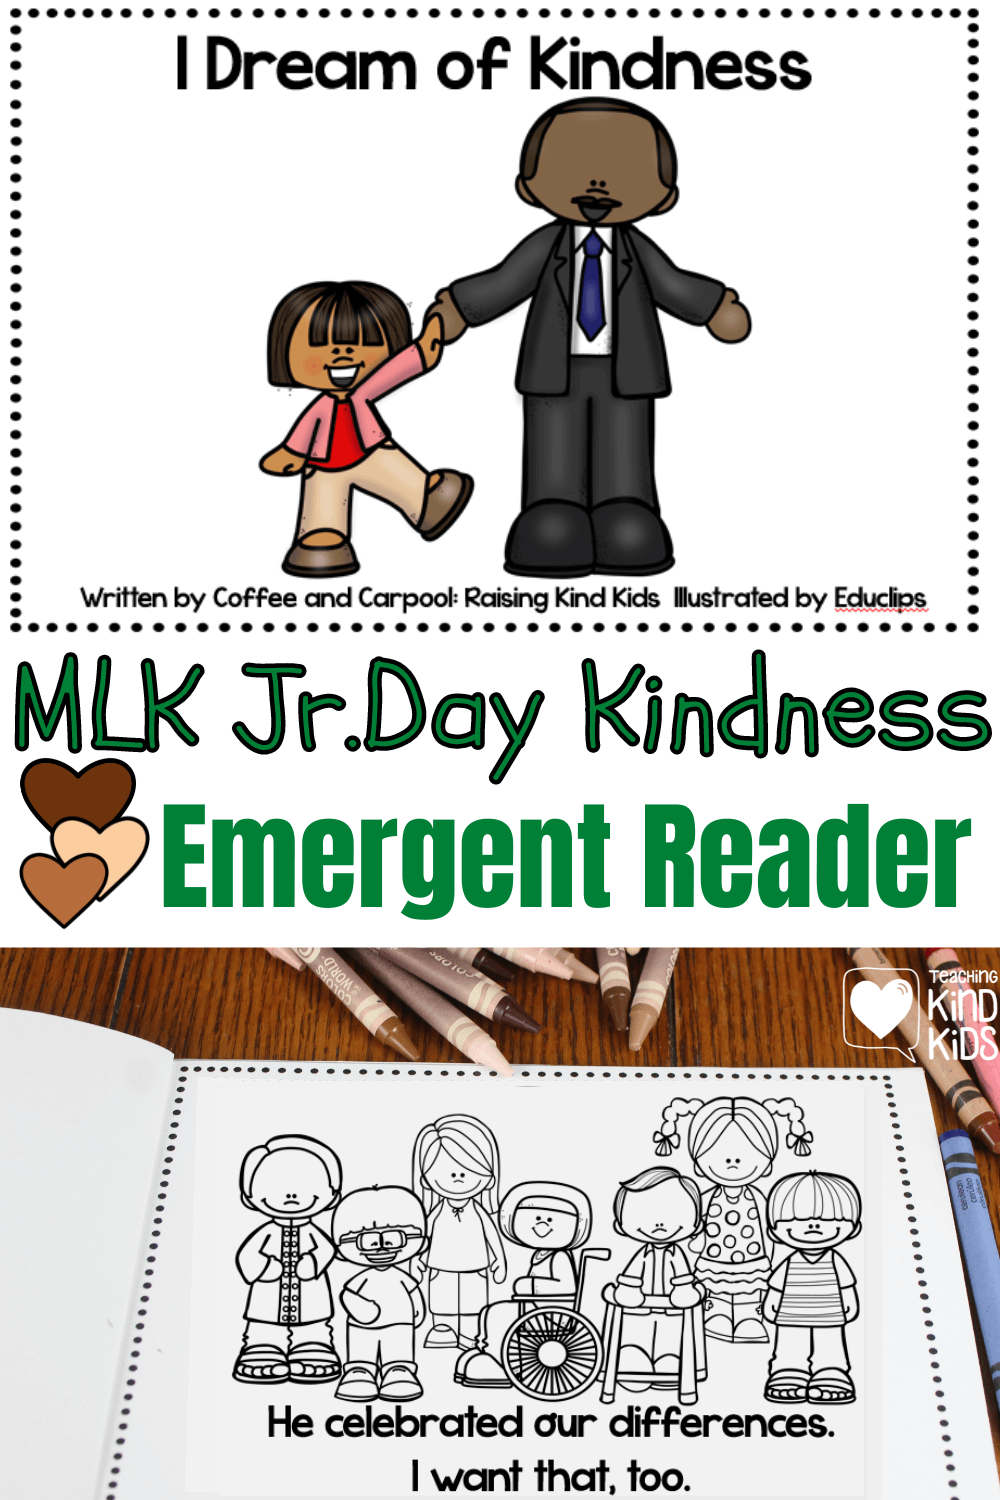 Use this Martin Luther King Jr. Day kindness emergent reader set is a fun way to learn about MLK Jr. Day and his I have a dream speech. 